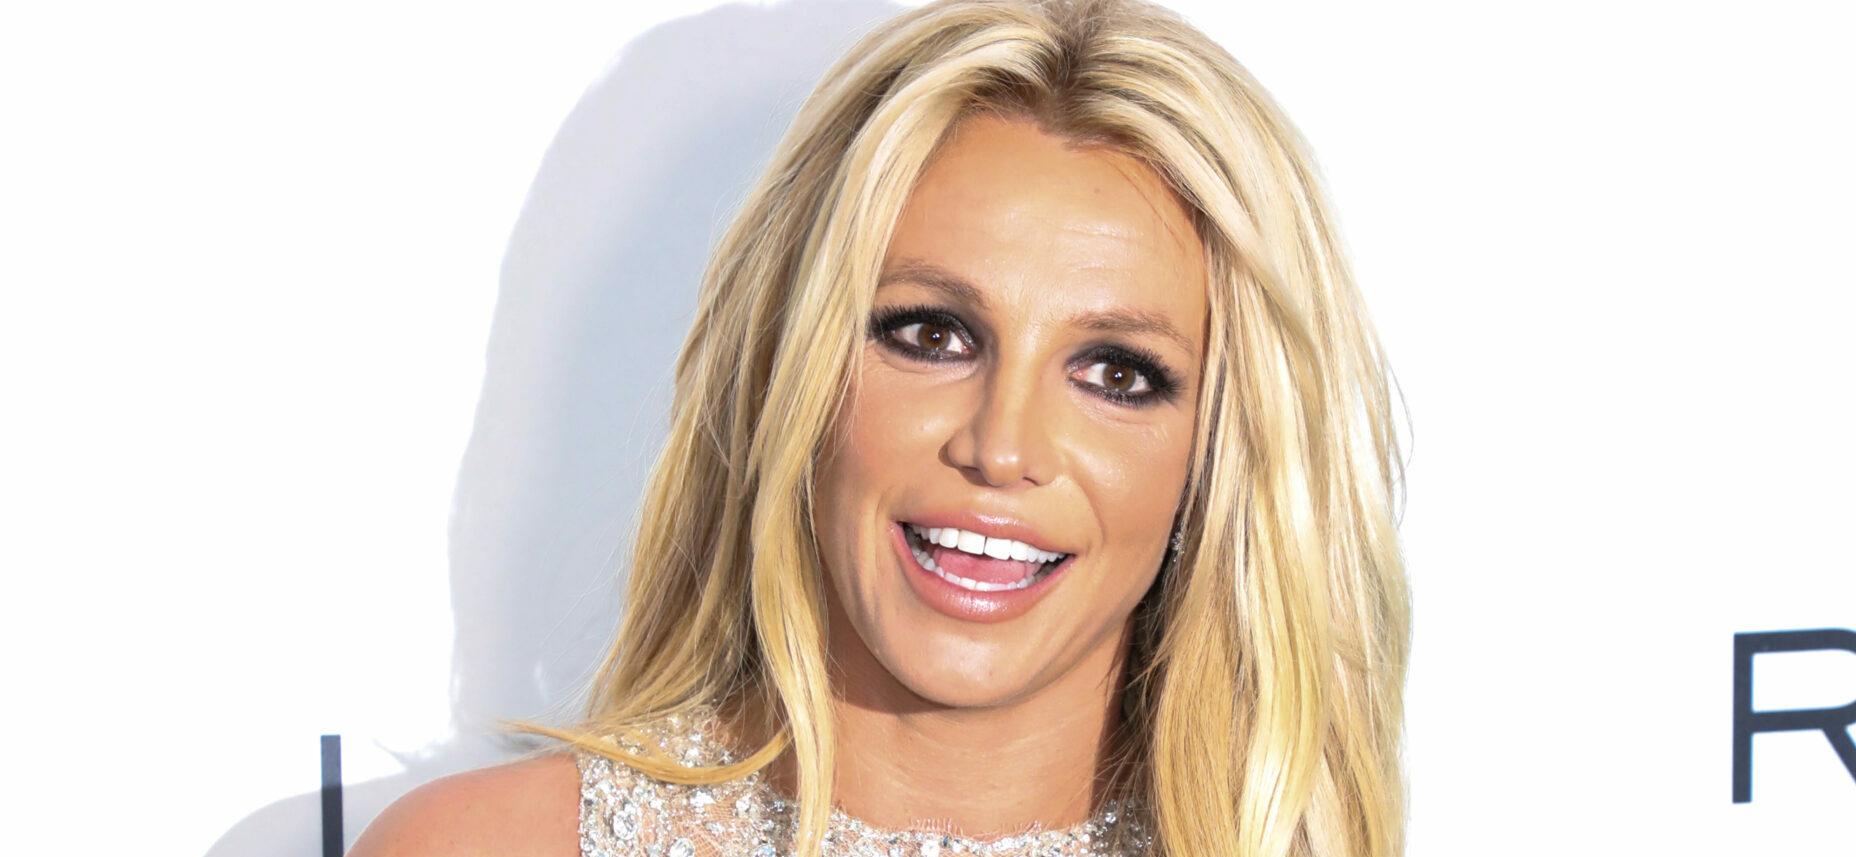 Britney Spears Says She Is Finally On Right Medication Following Conservatorship No Doctors scaled e1638235779830